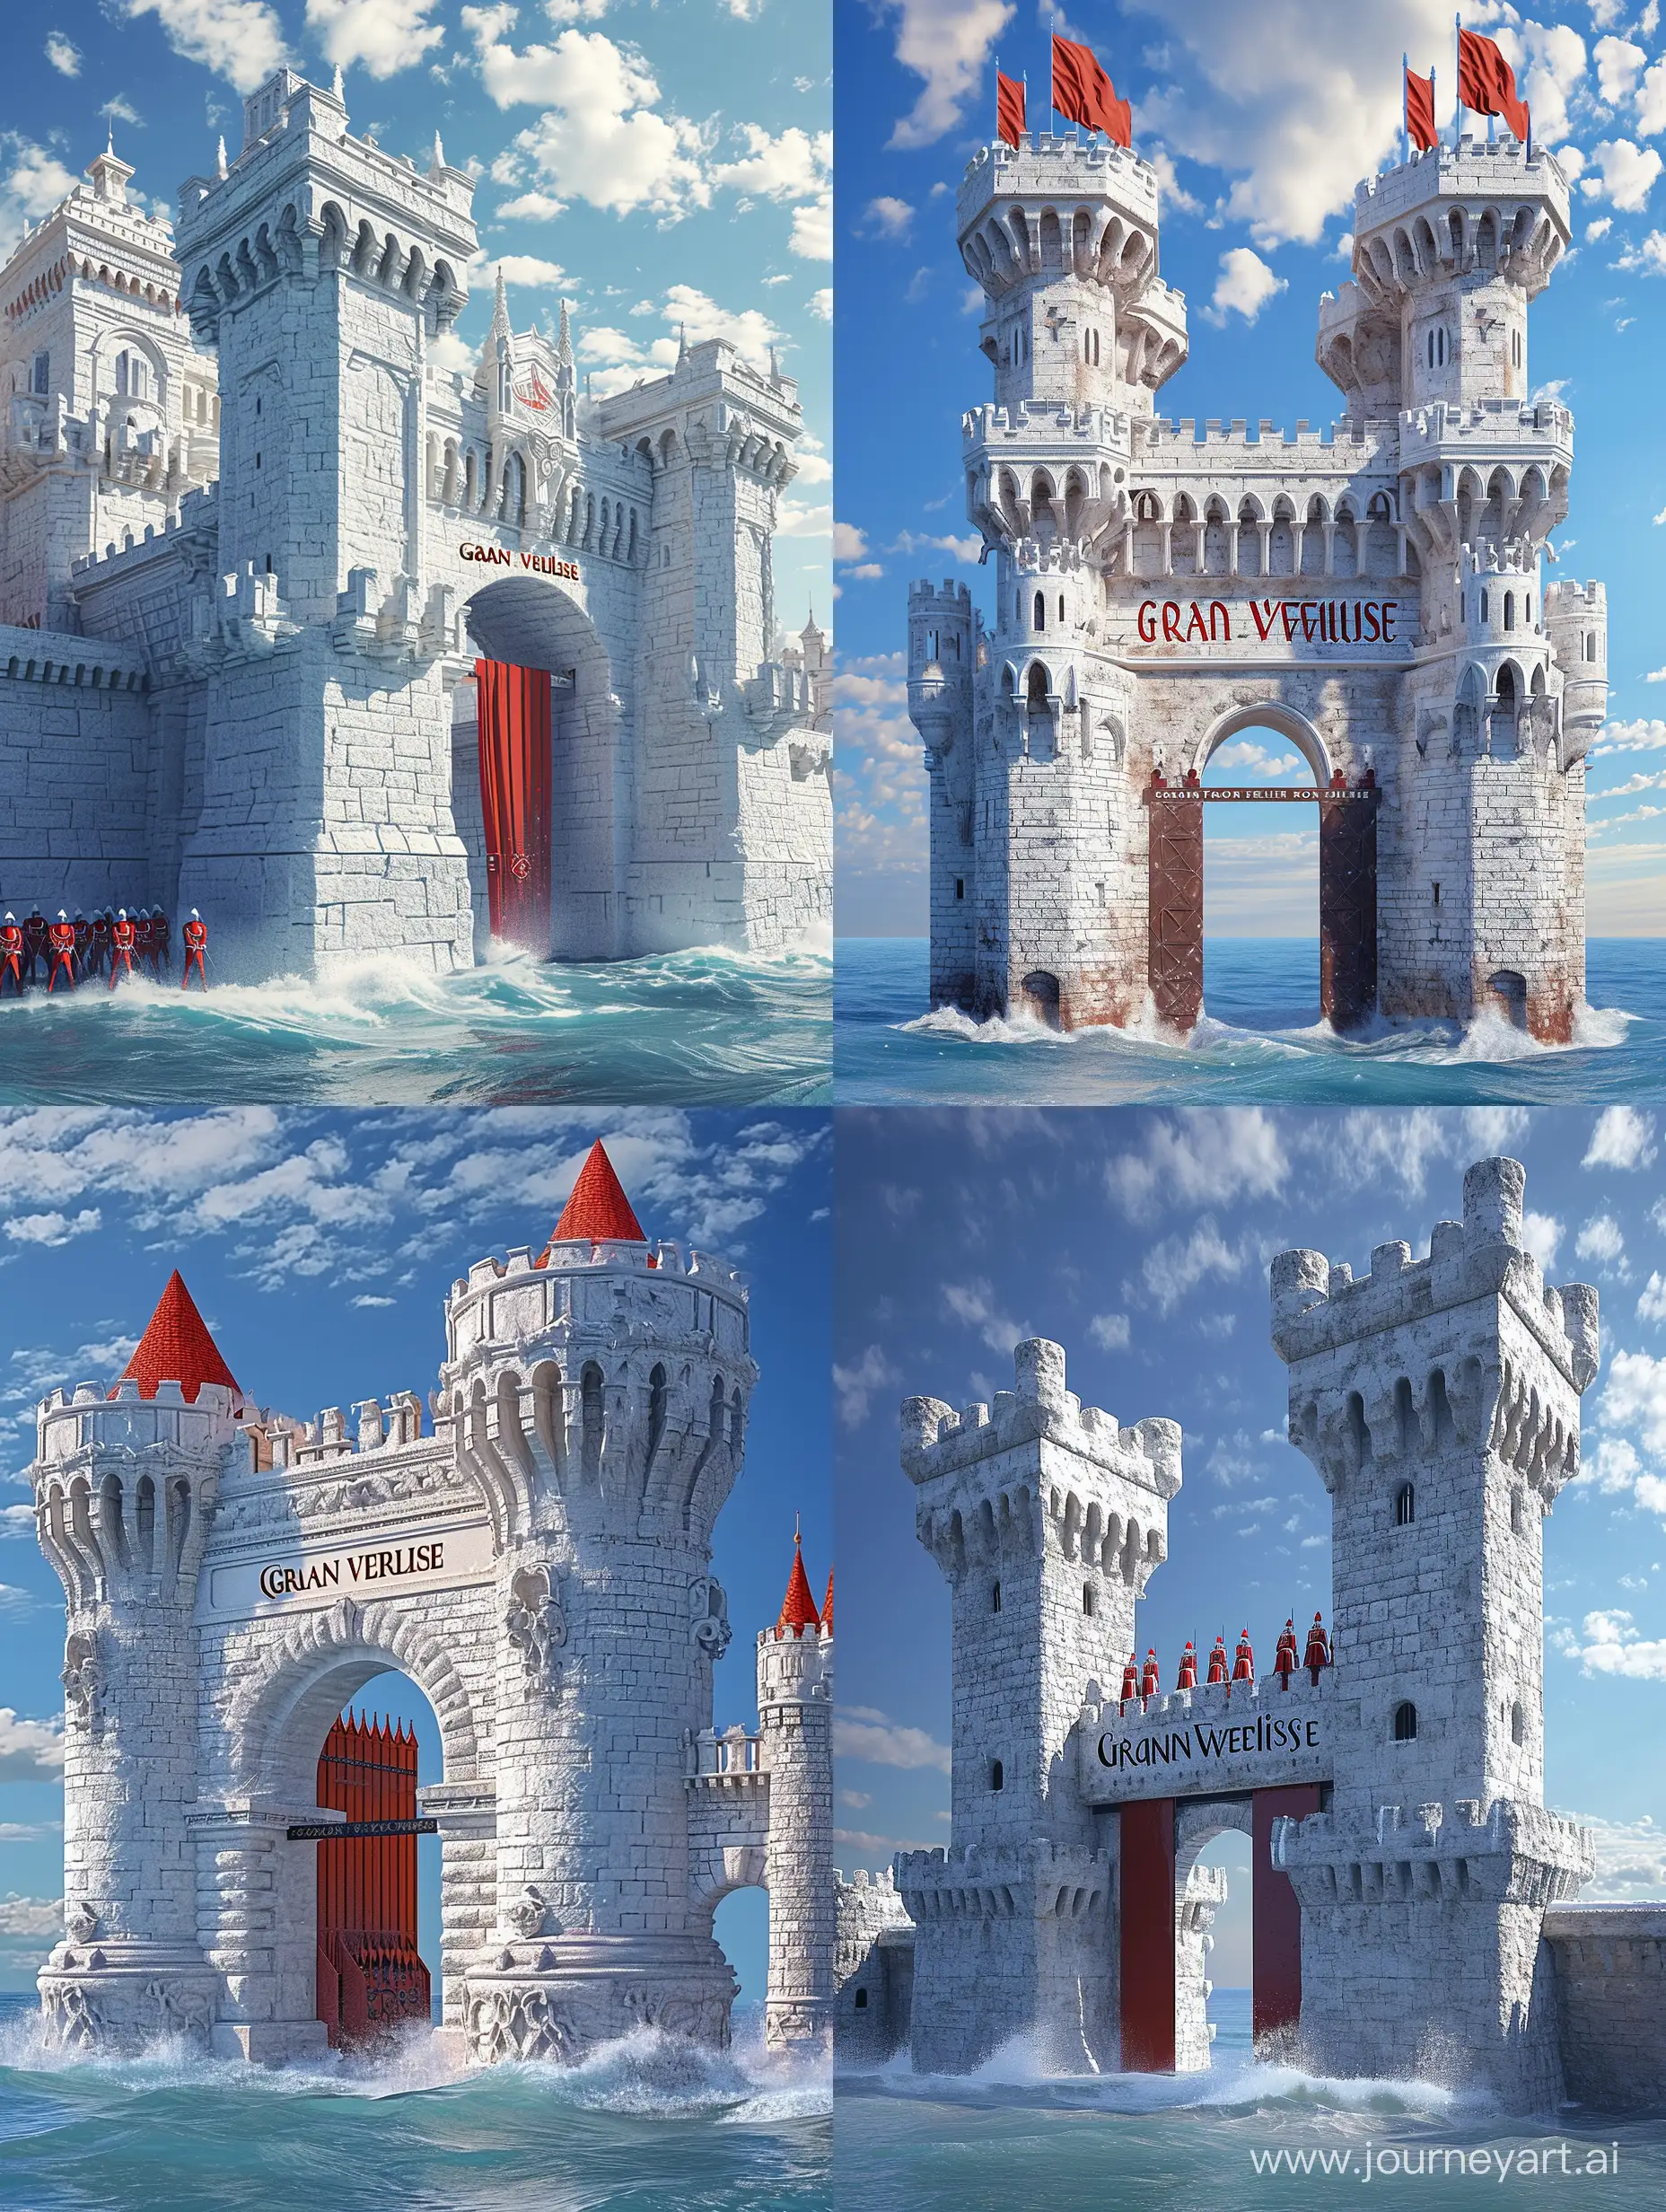 royal city, entrance, white stone construction, on the sea, portcullis with the words "Grand Verlise" engraved above, red royal colours, guards, towers, fantasy, photorealistic